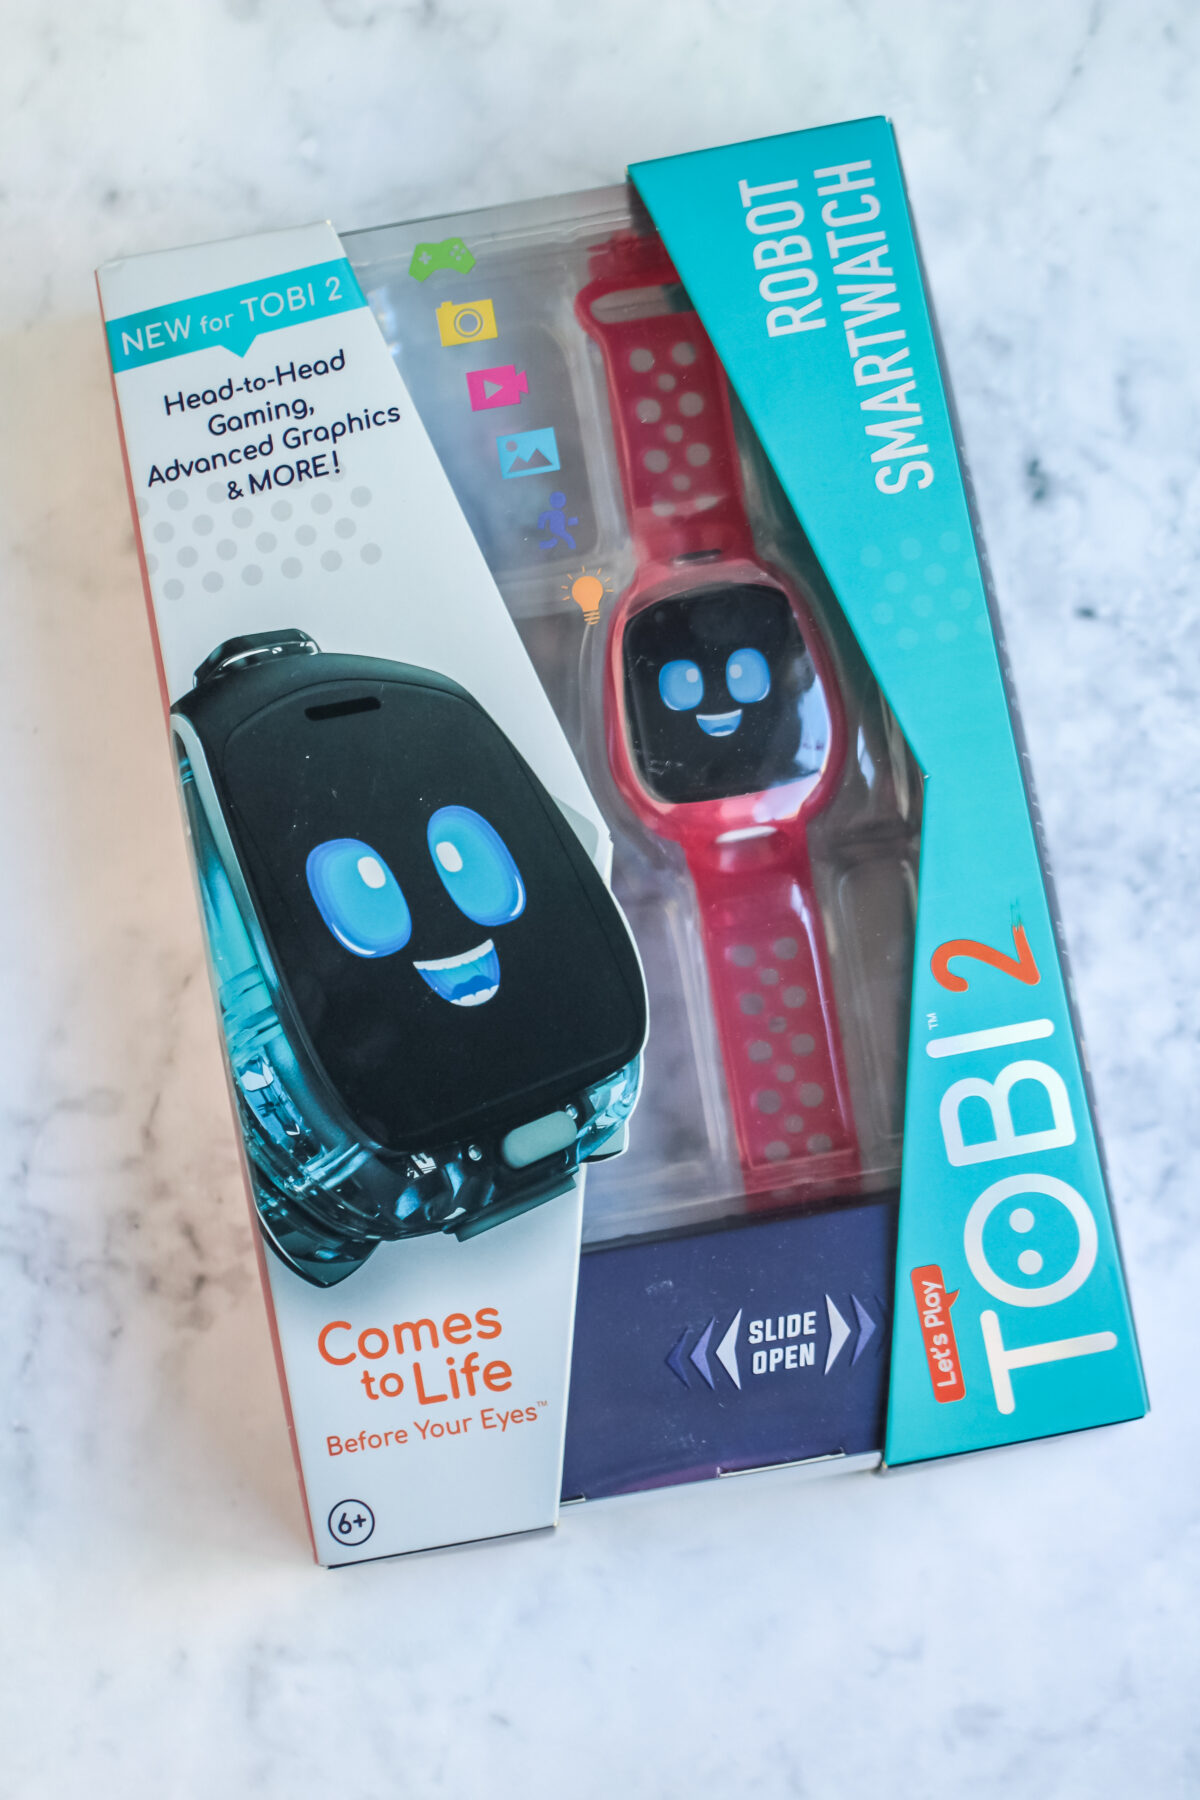 The Tobi™ 2 Robot Smartwatch is a must-have for kids who want to keep up with the latest in technology - with tons of cool features!